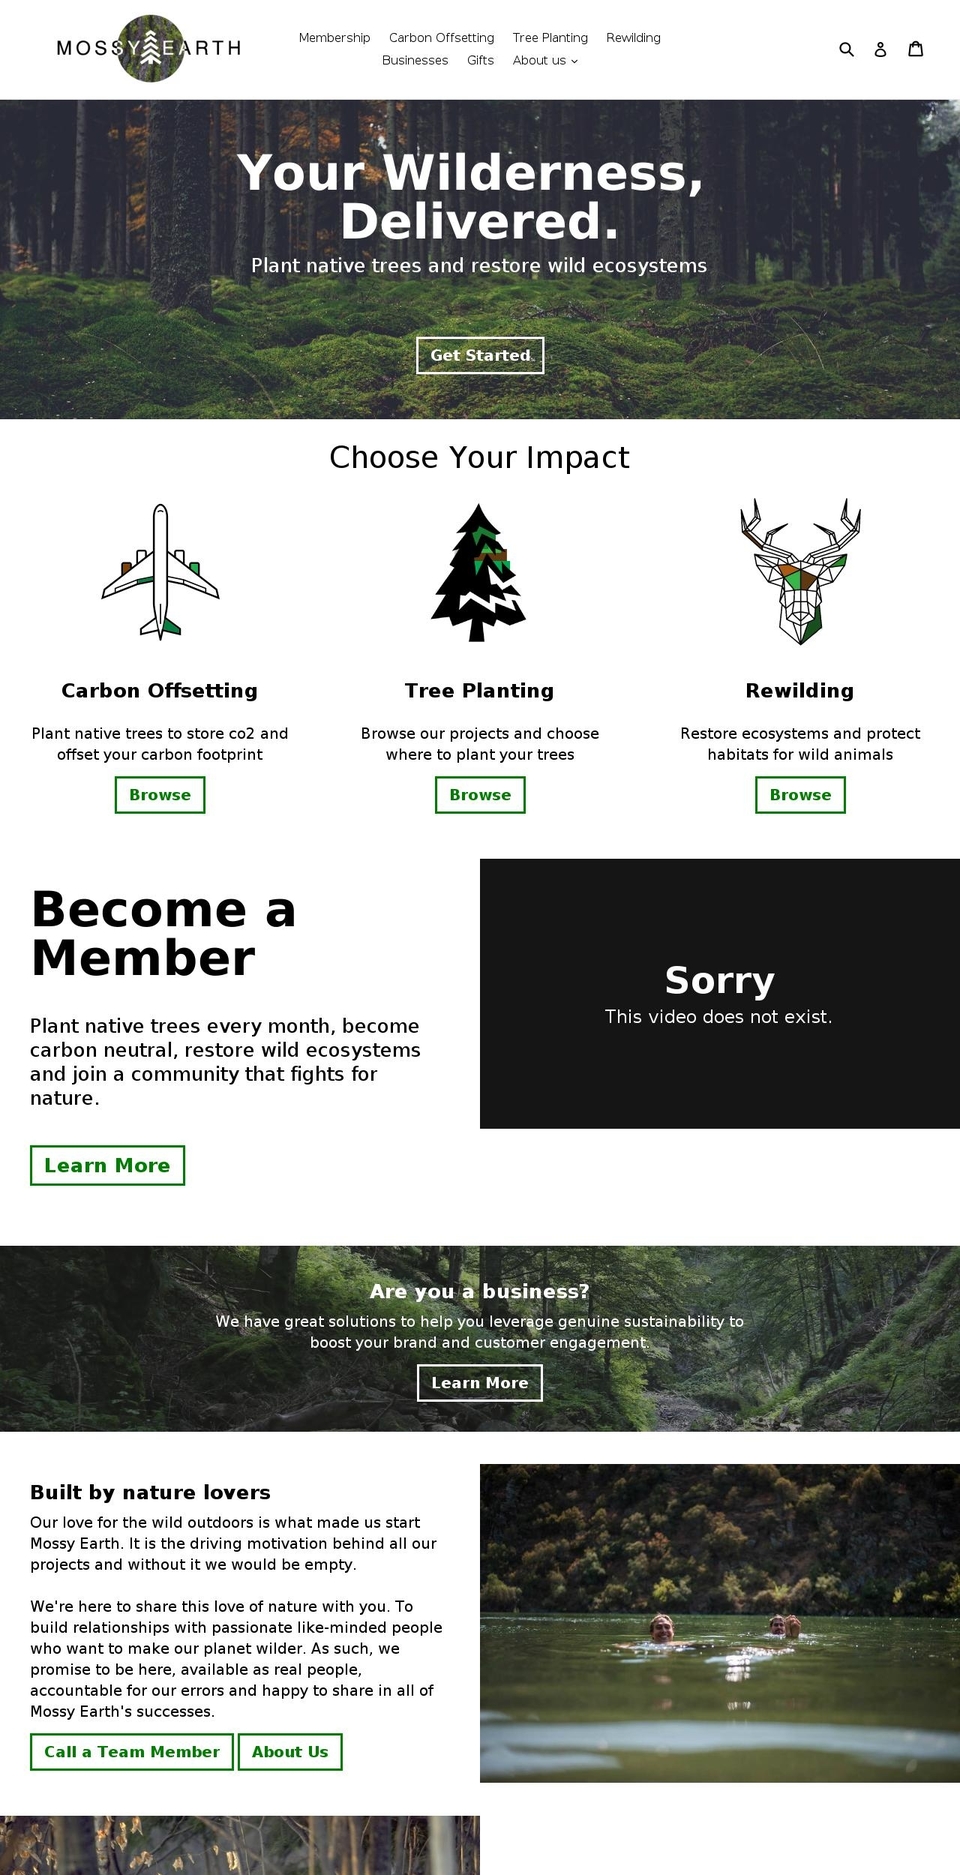 Mossy Earth - DZ Custom Edit Shopify theme site example mossy.earth